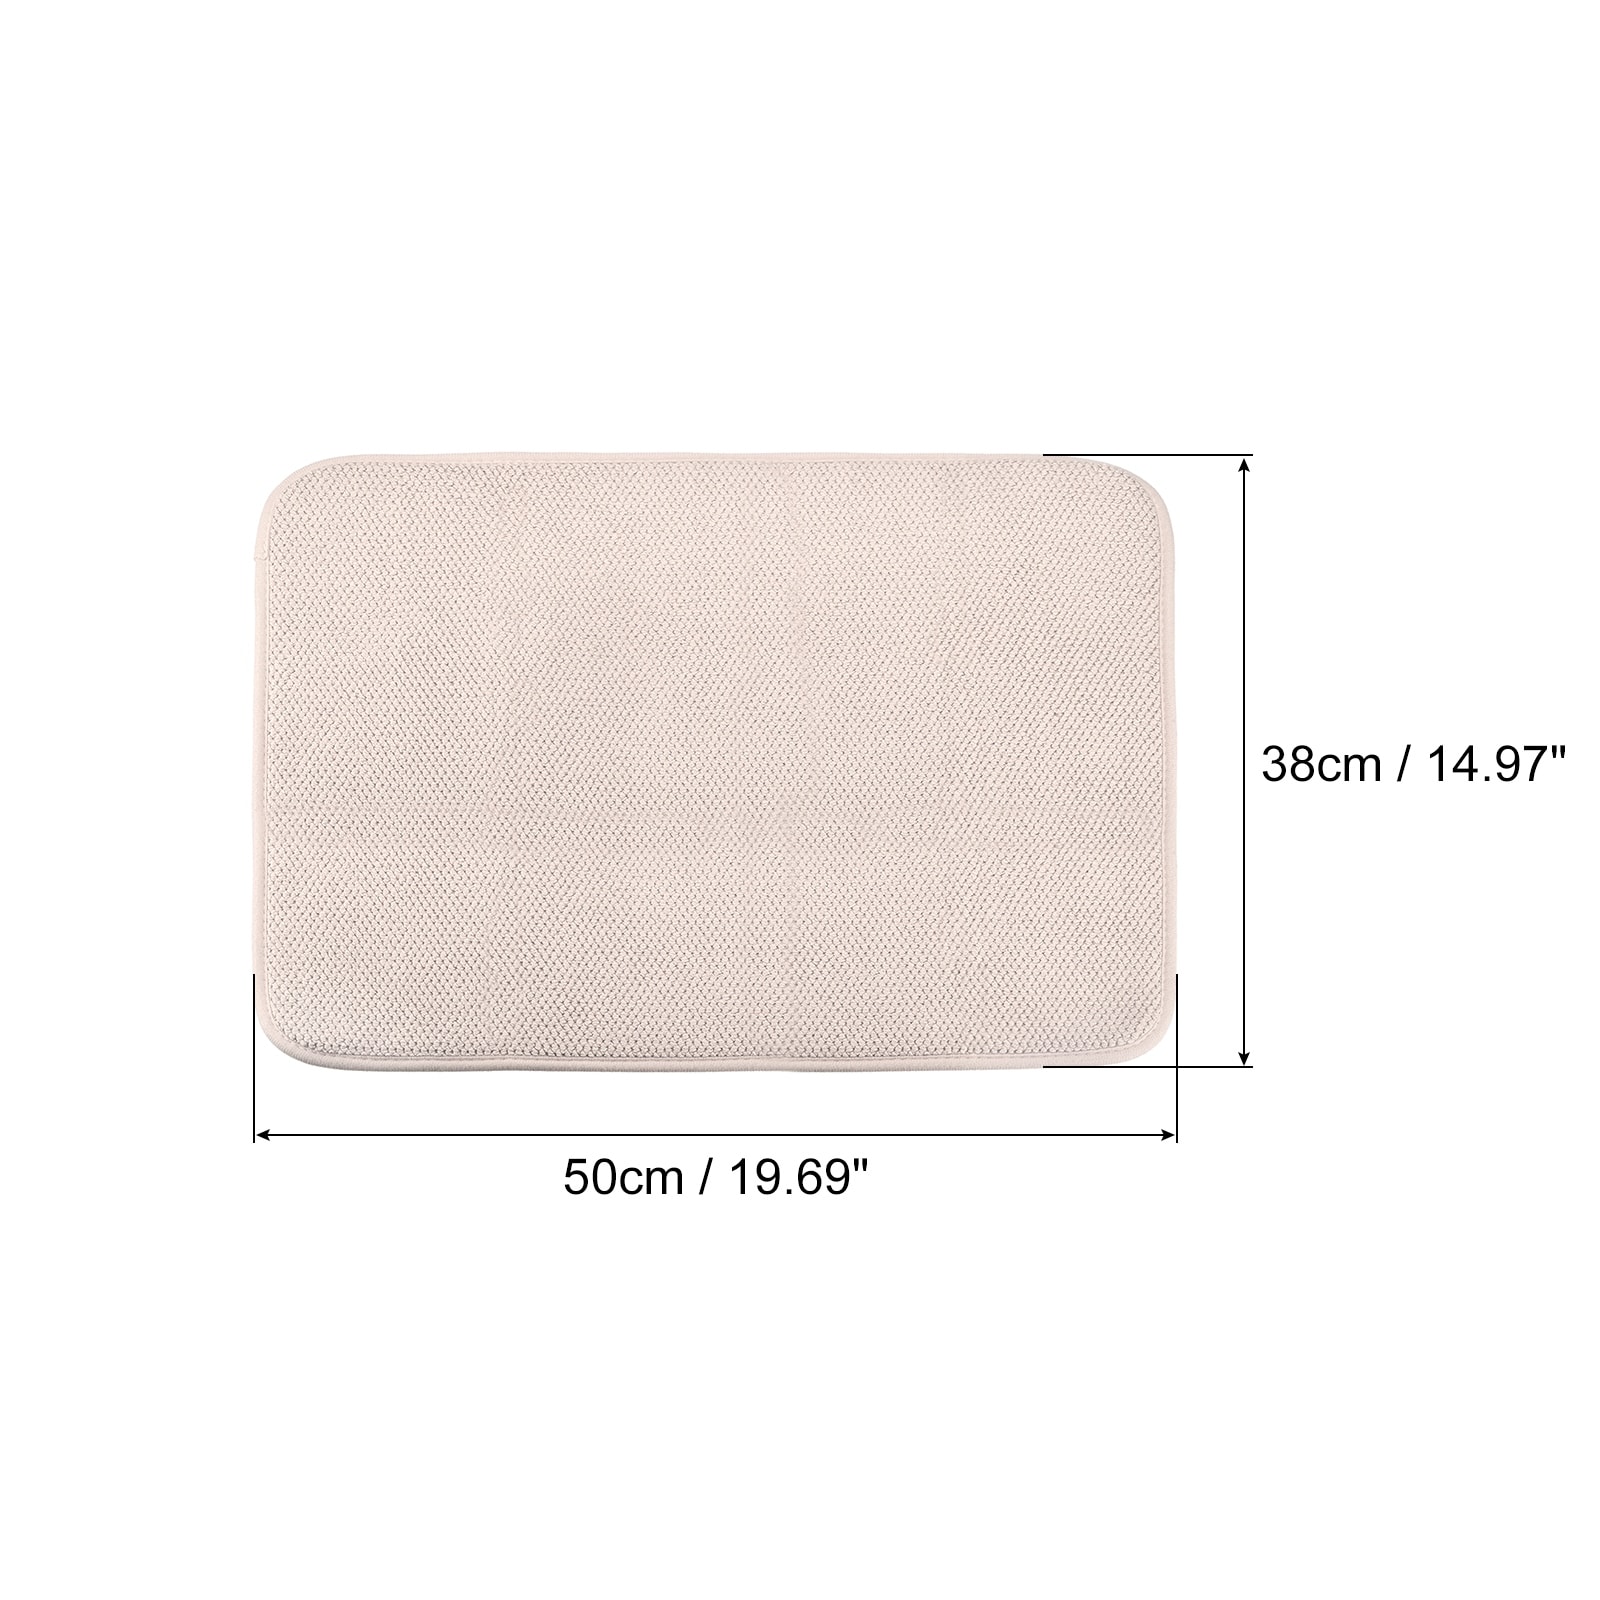 https://ak1.ostkcdn.com/images/products/is/images/direct/5f96a39d7bddca58bf743c0385d365a0994a77d2/Dish-Drying-Mat-2pcs%2C-Microfiber-Dish-Drying-Pad-Dish-Drainer-Mat-Red.jpg